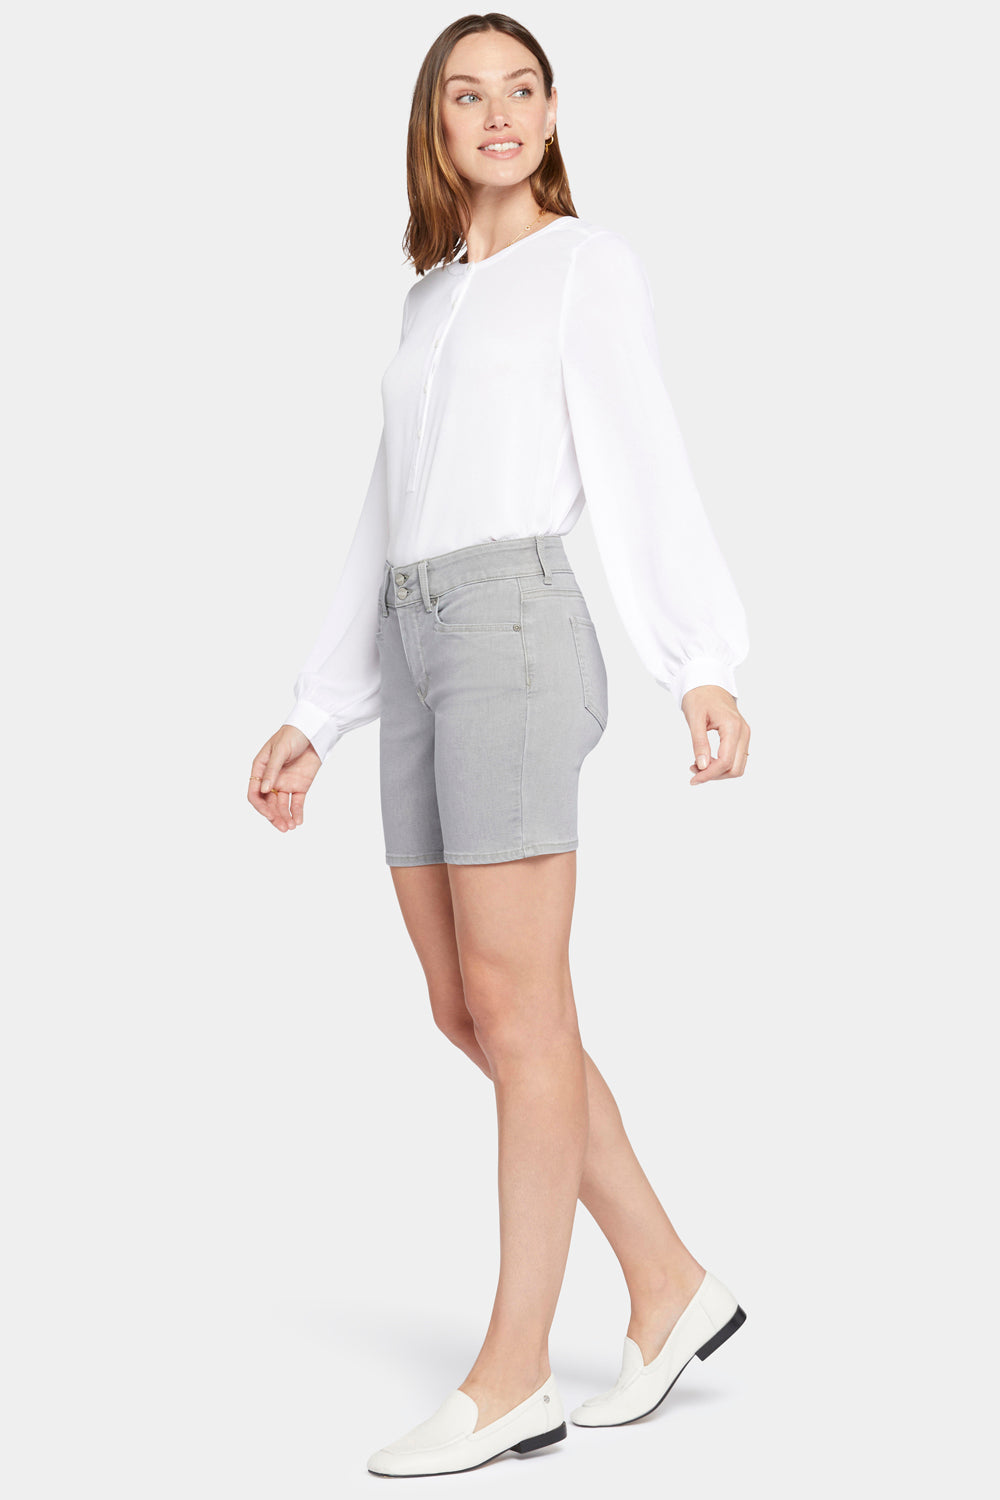 NYDJ Frankie Relaxed Denim Shorts With Wide Waistband and Squared Pockets - Charisma